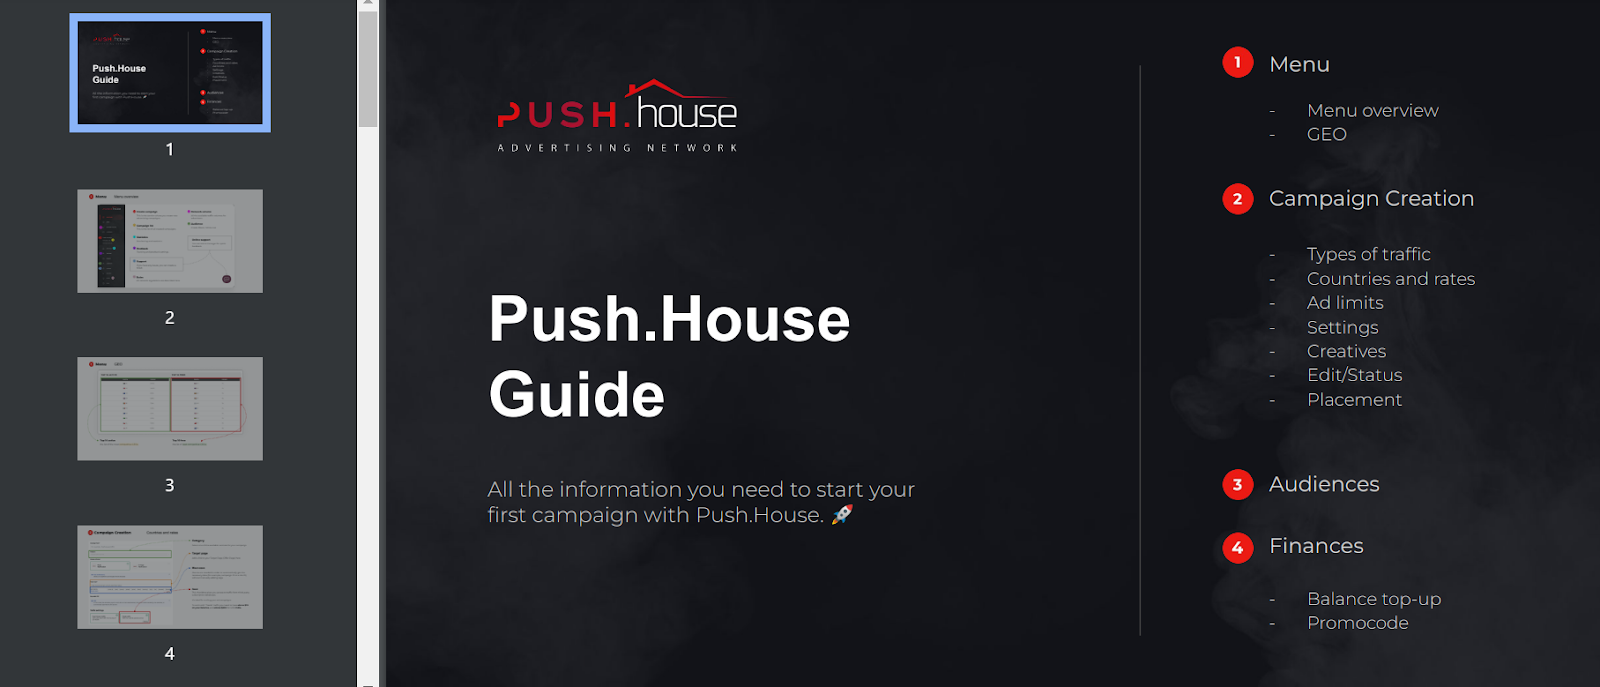 Push.House guide